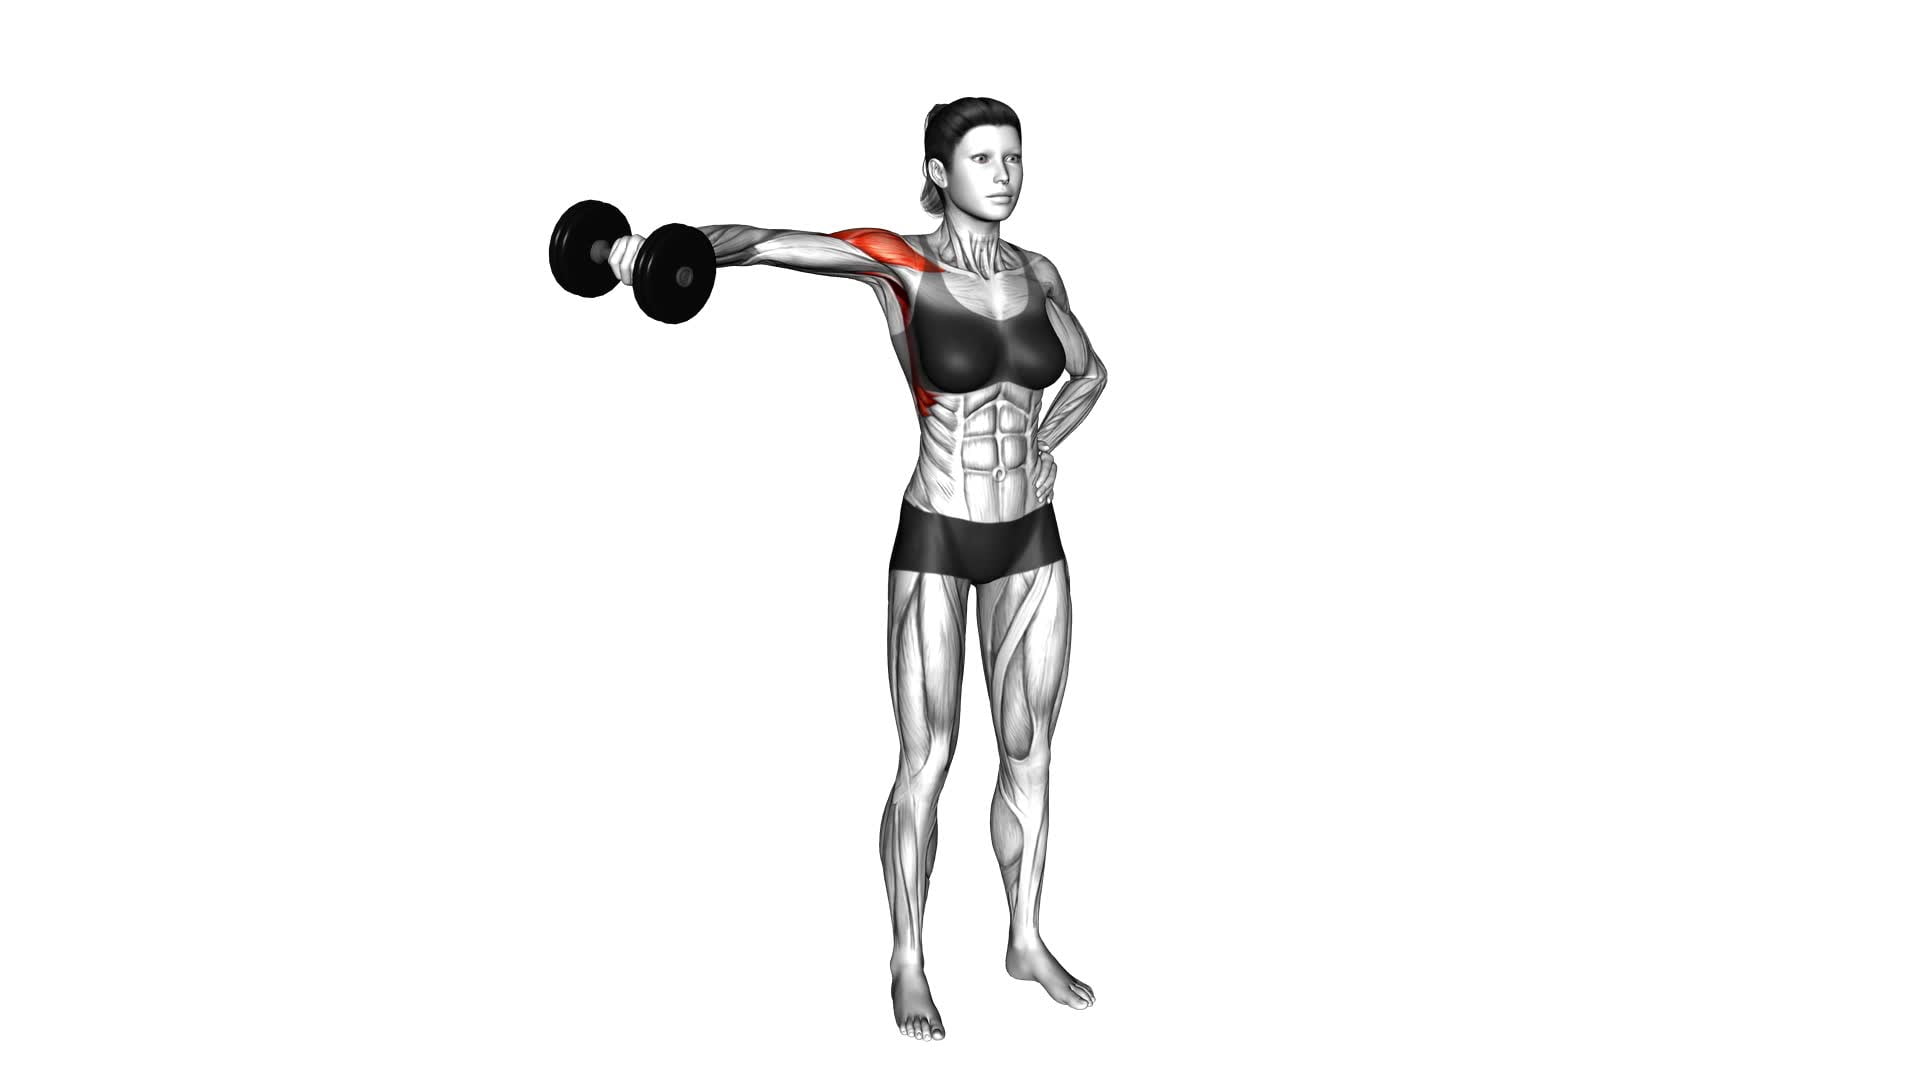 Dumbbell One Arm Lateral Raise (female) - Video Exercise Guide & Tips